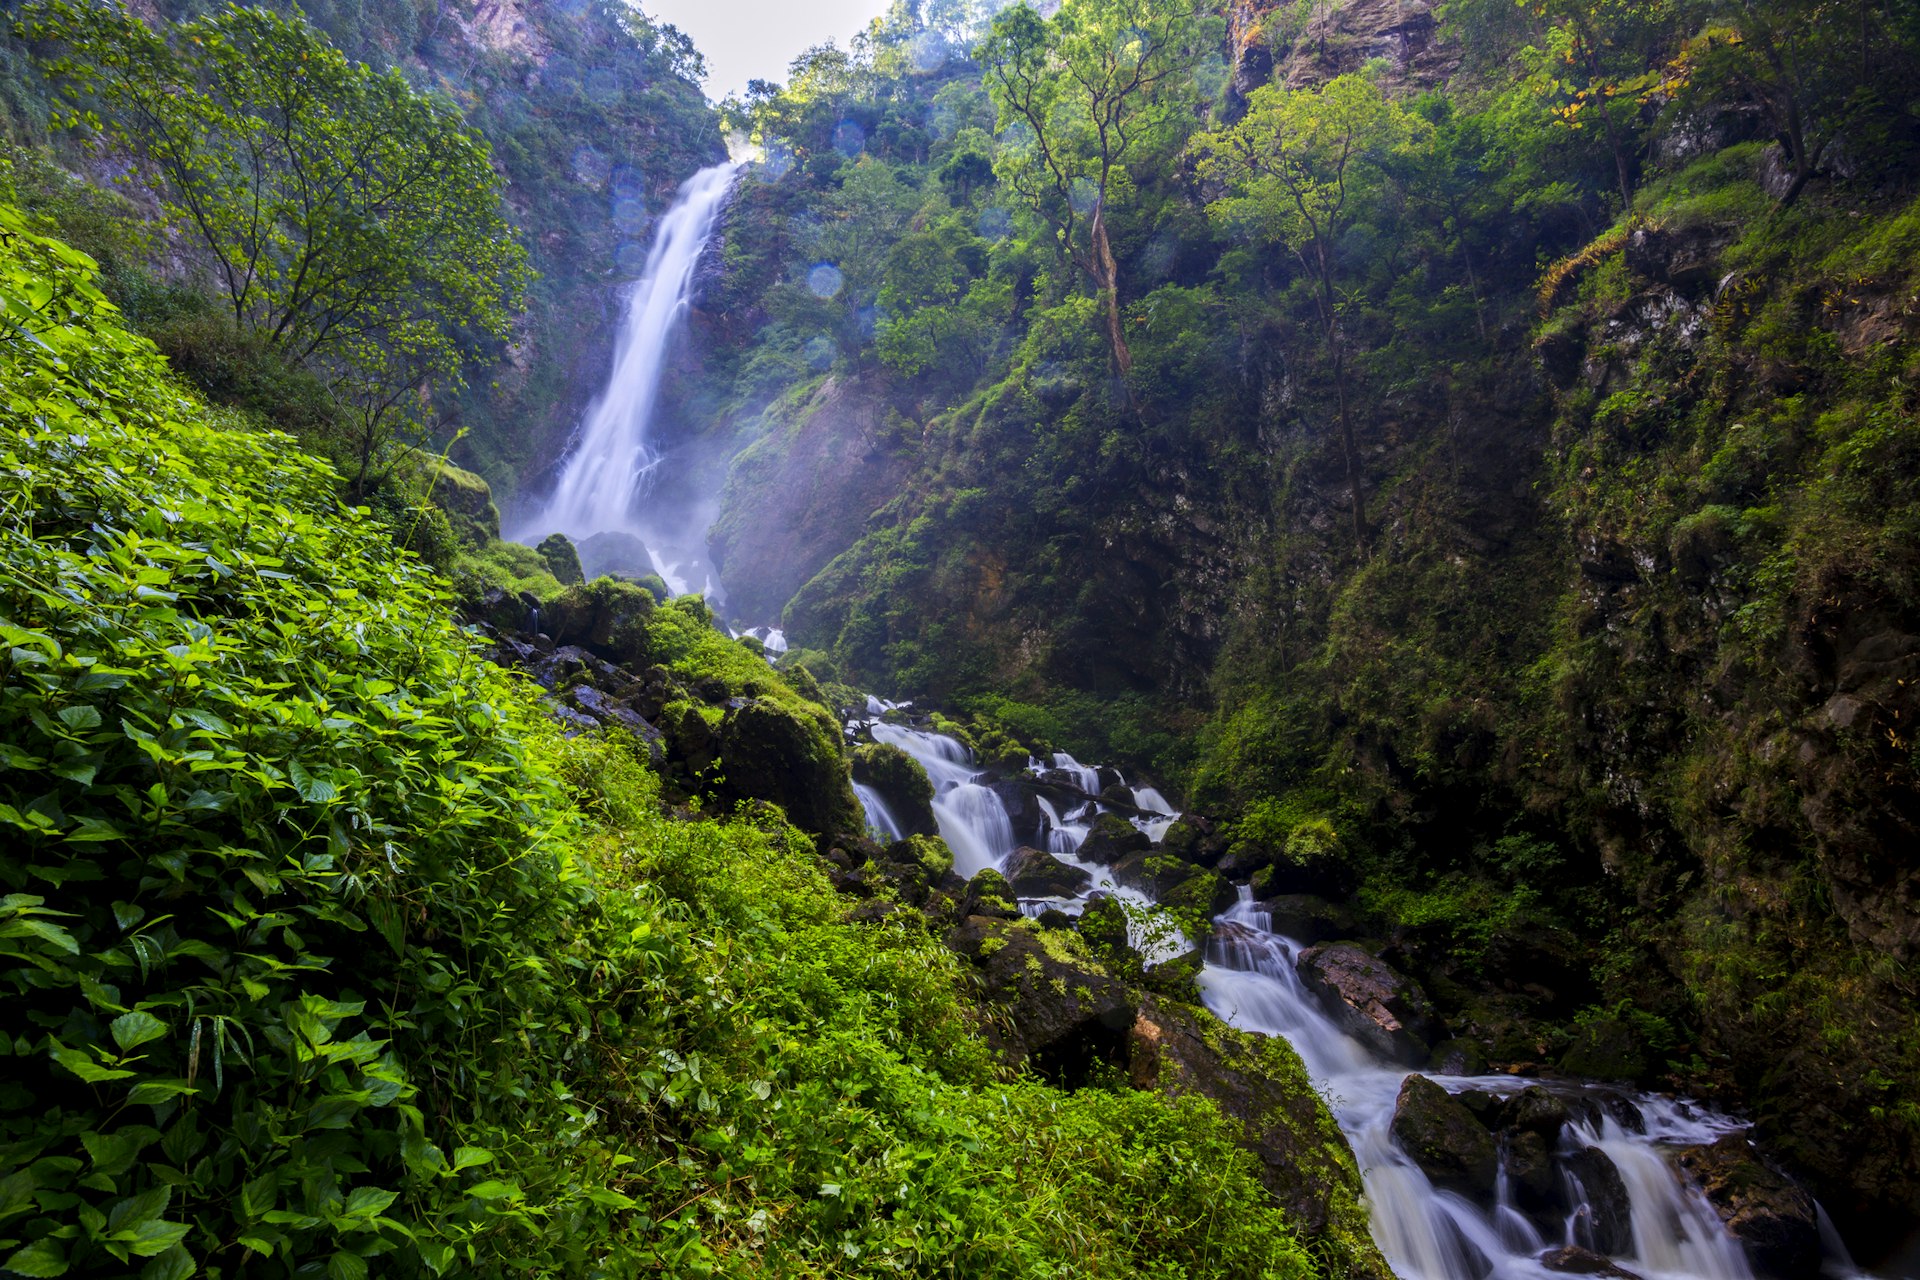 A cascade of waterfall in an area covered in dense green undergrowth